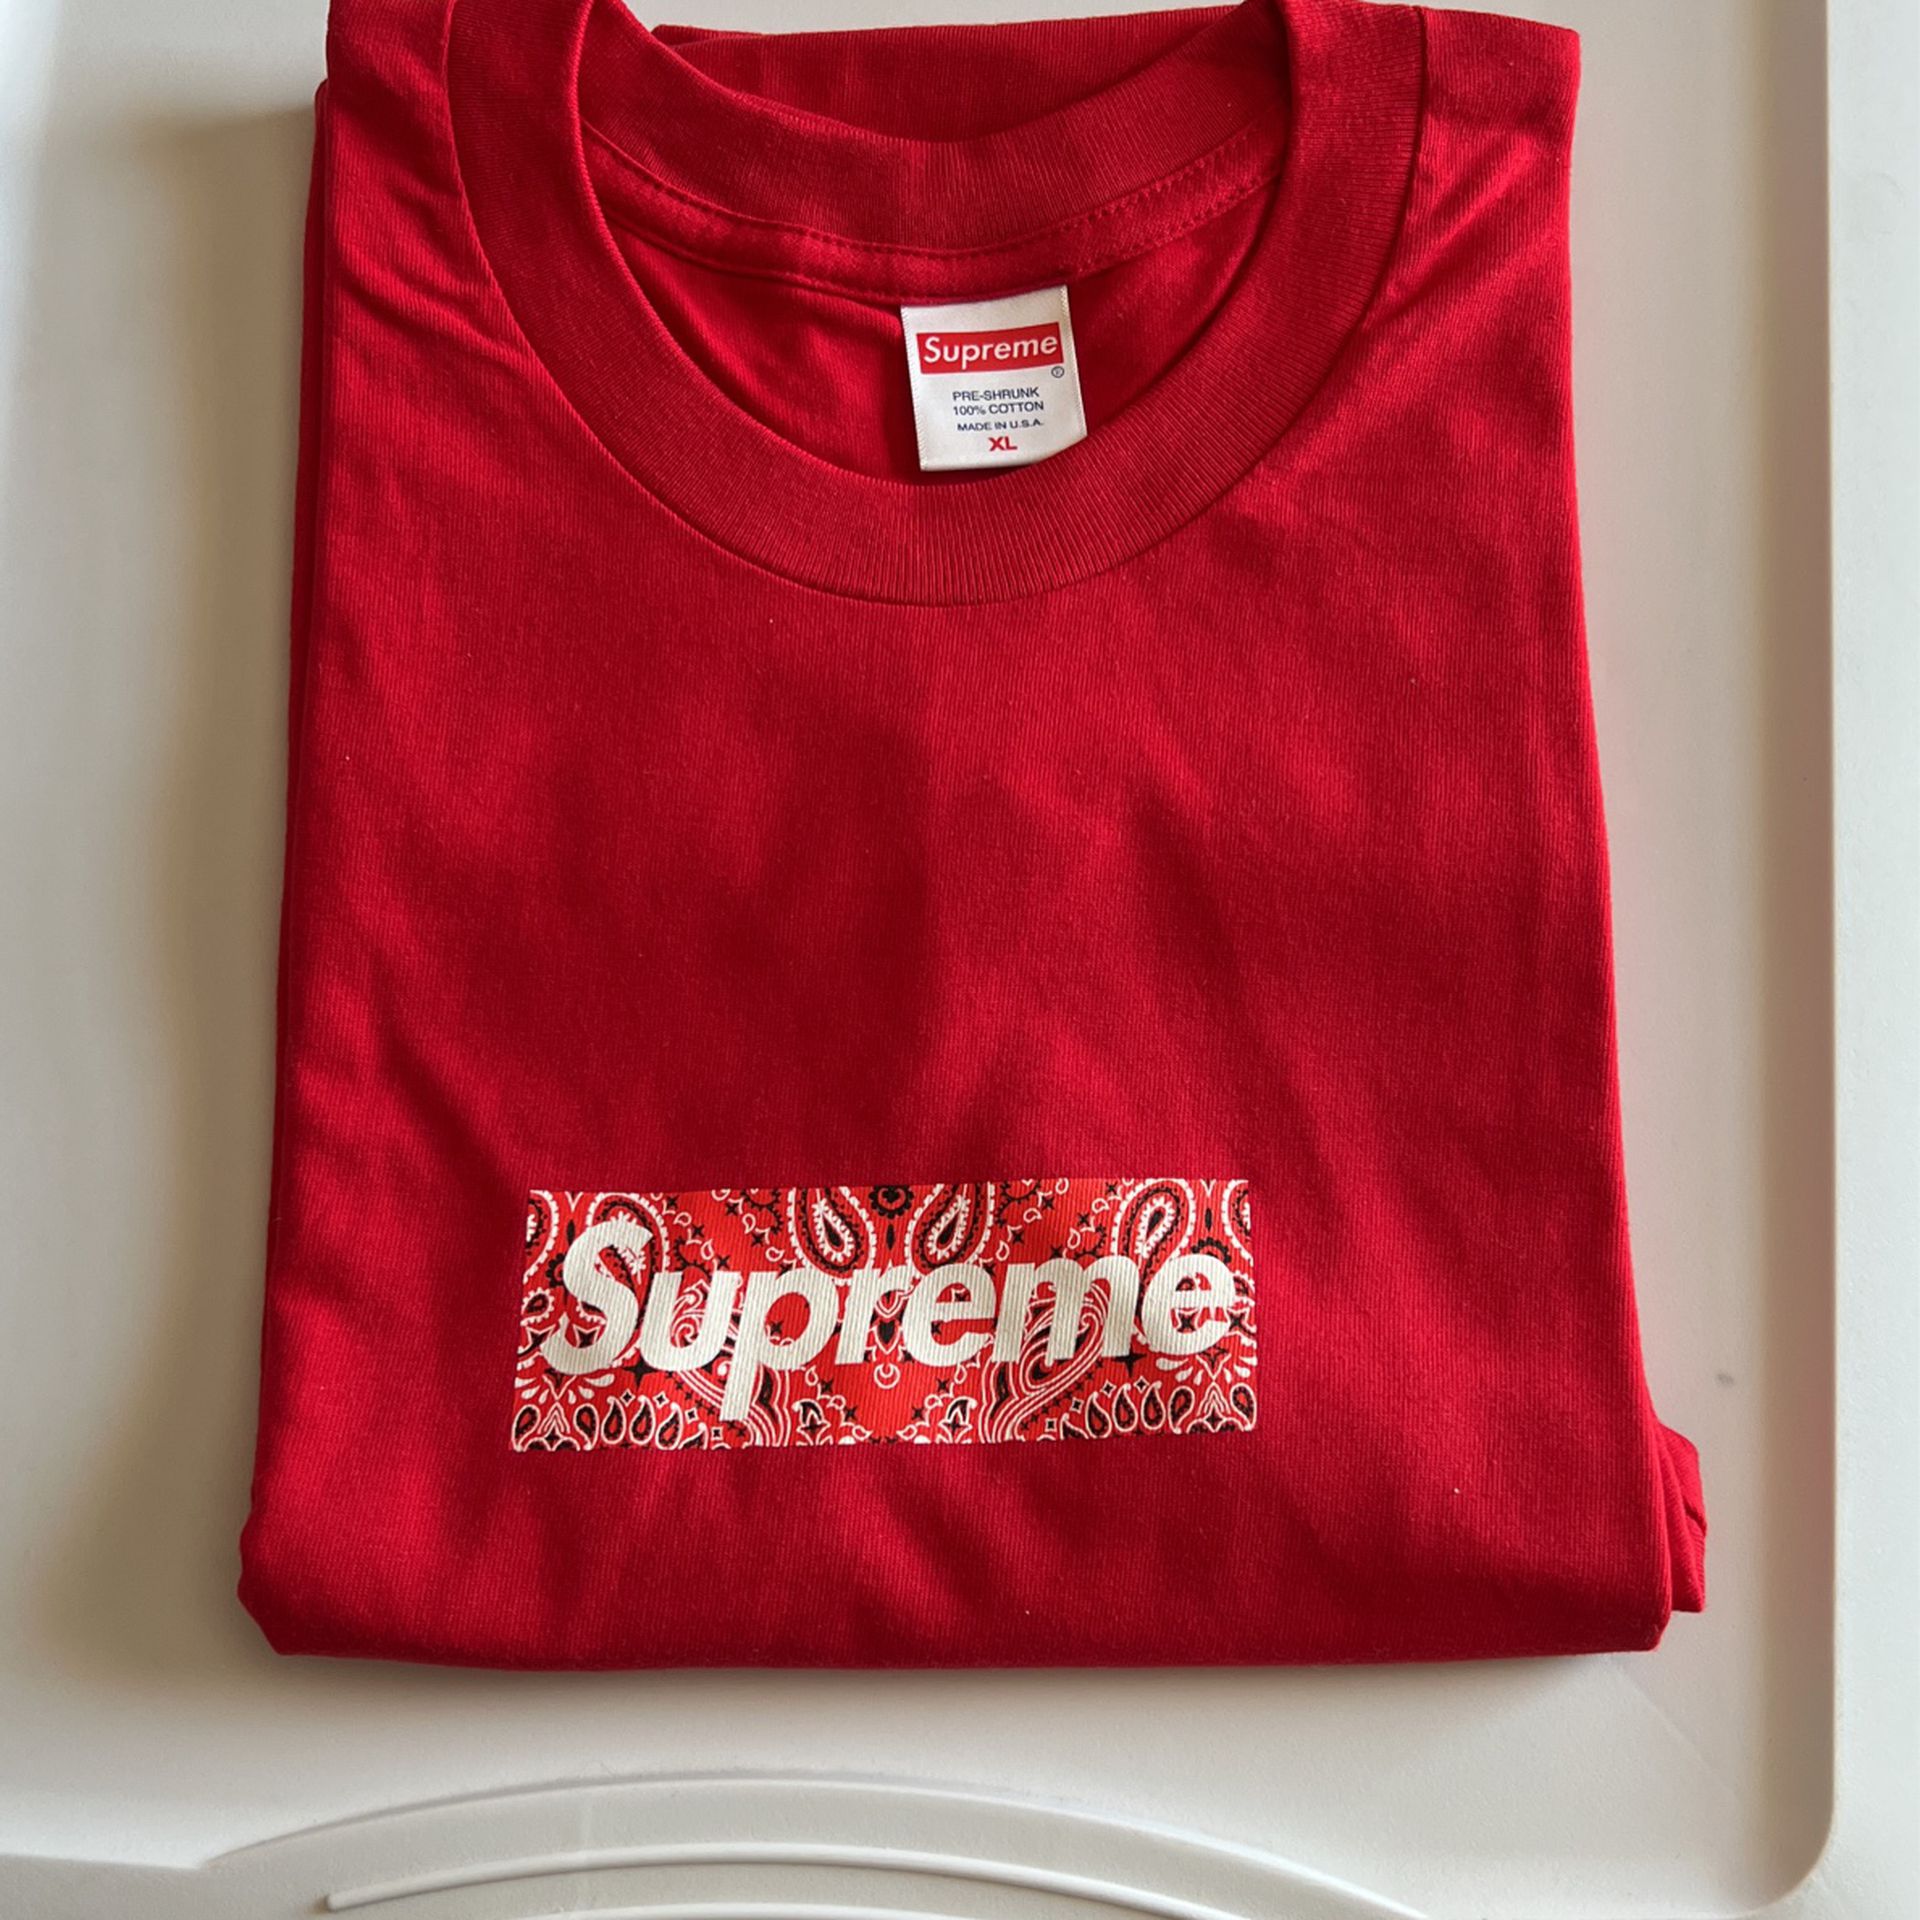 Authentic supreme Red Bandana box logo tee xl New for Sale in